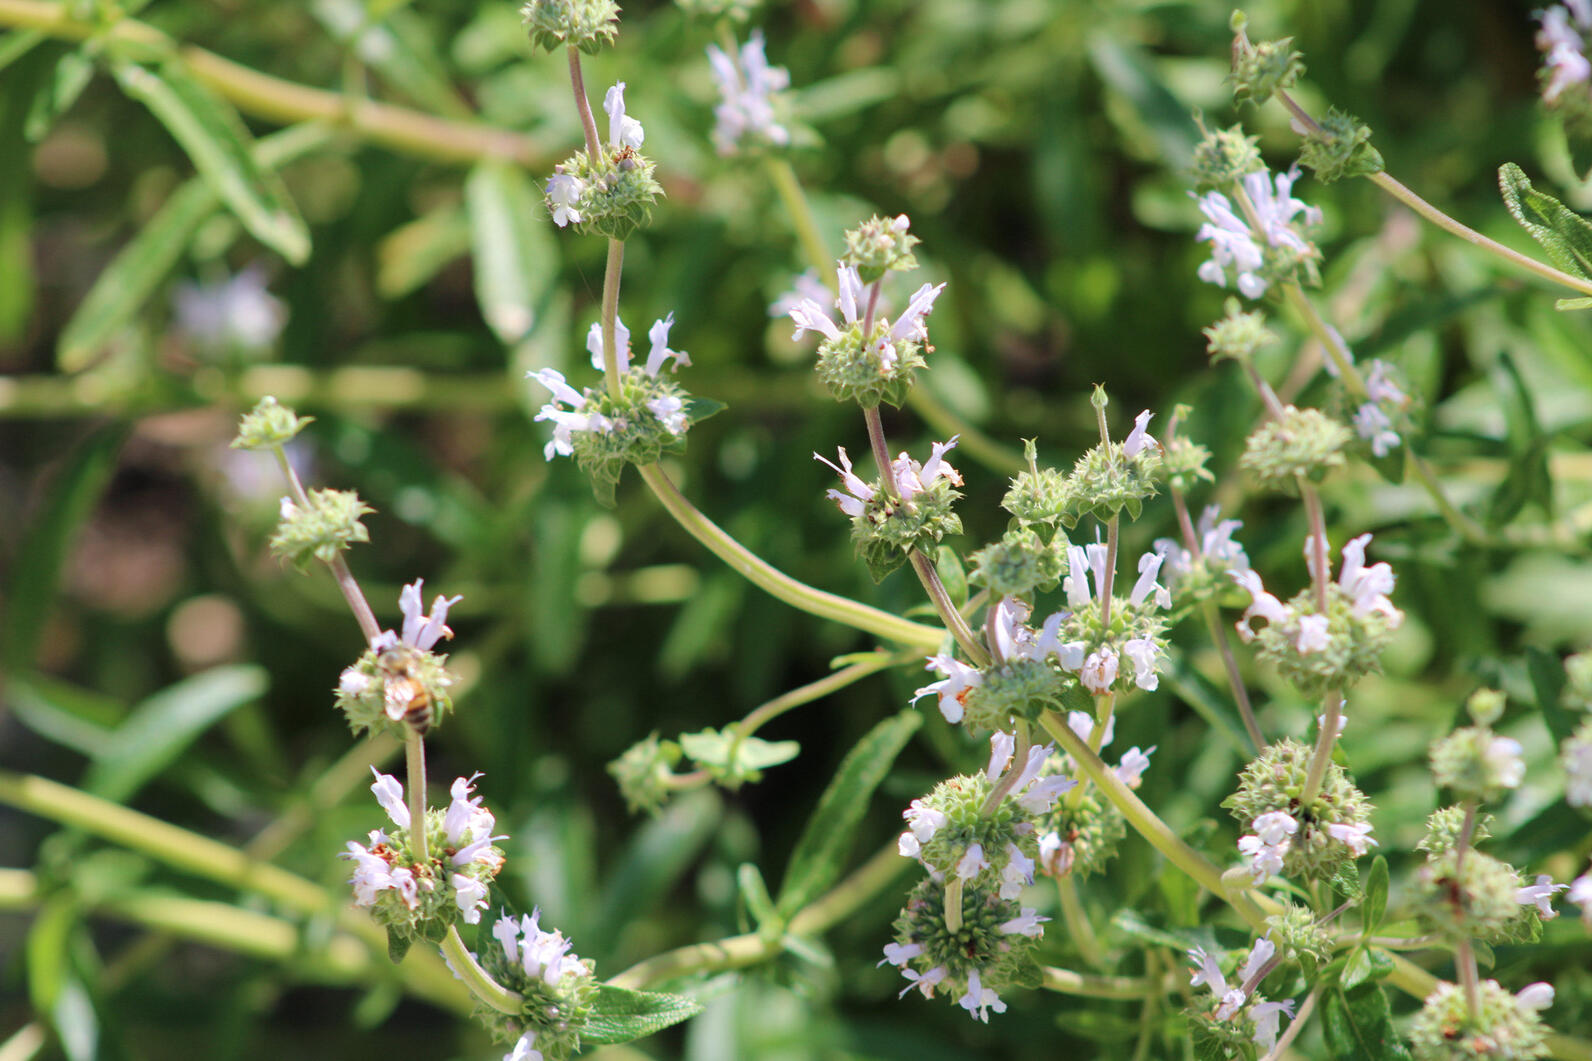 Black sage (Salvia mellifera) with white flowers blooming. 